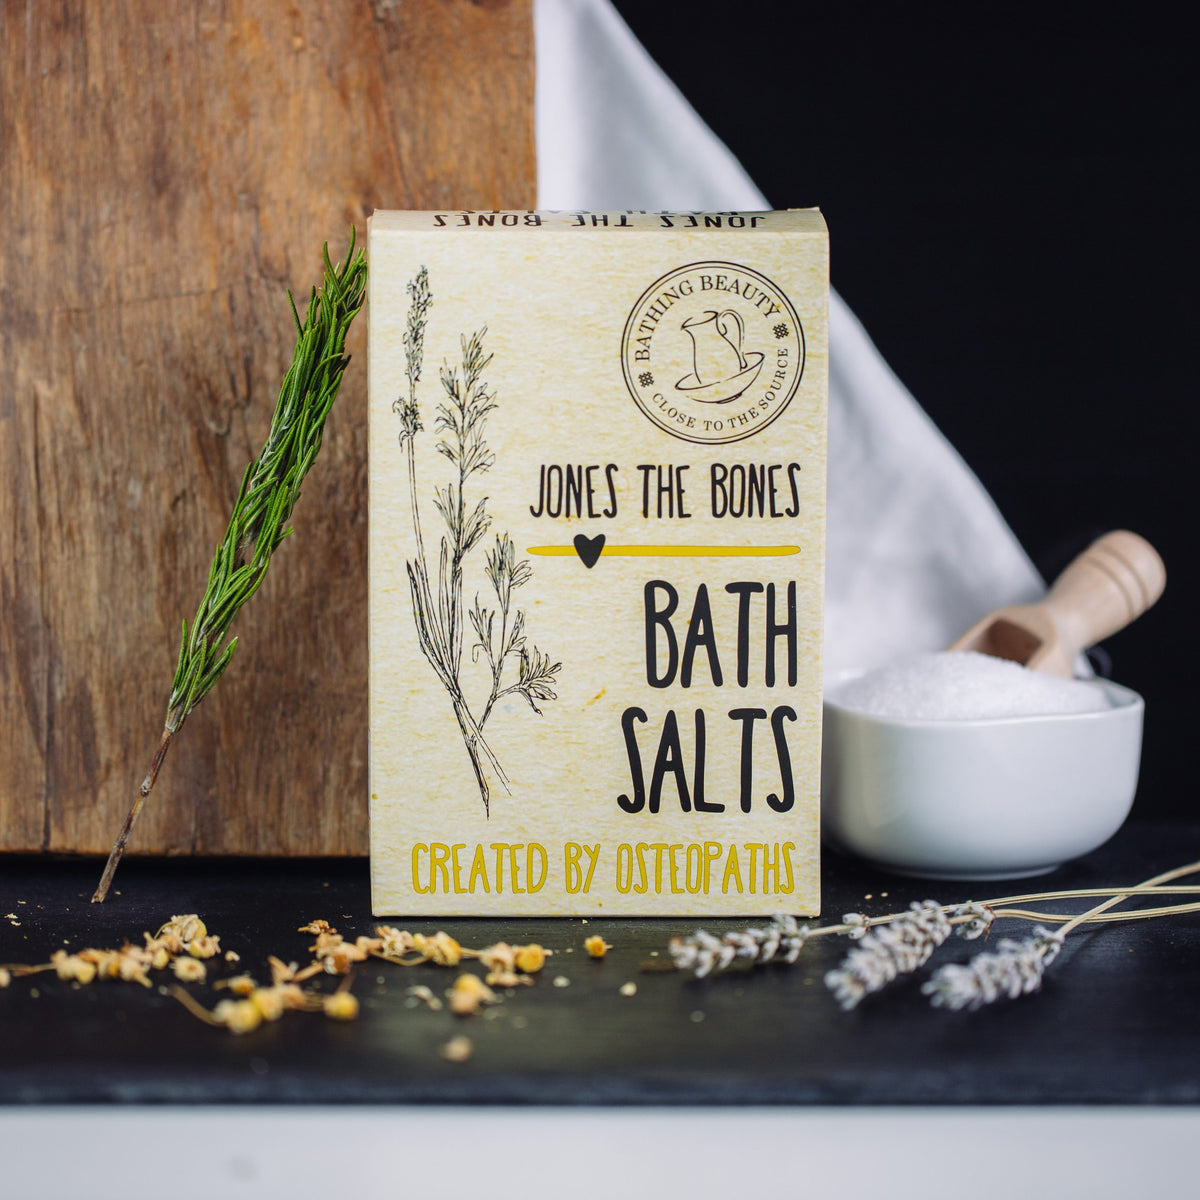 Image displays a picture of a yellow box, with floral illustrations and rustic style font which reads 'Jones The Bones - Bath Salts'.